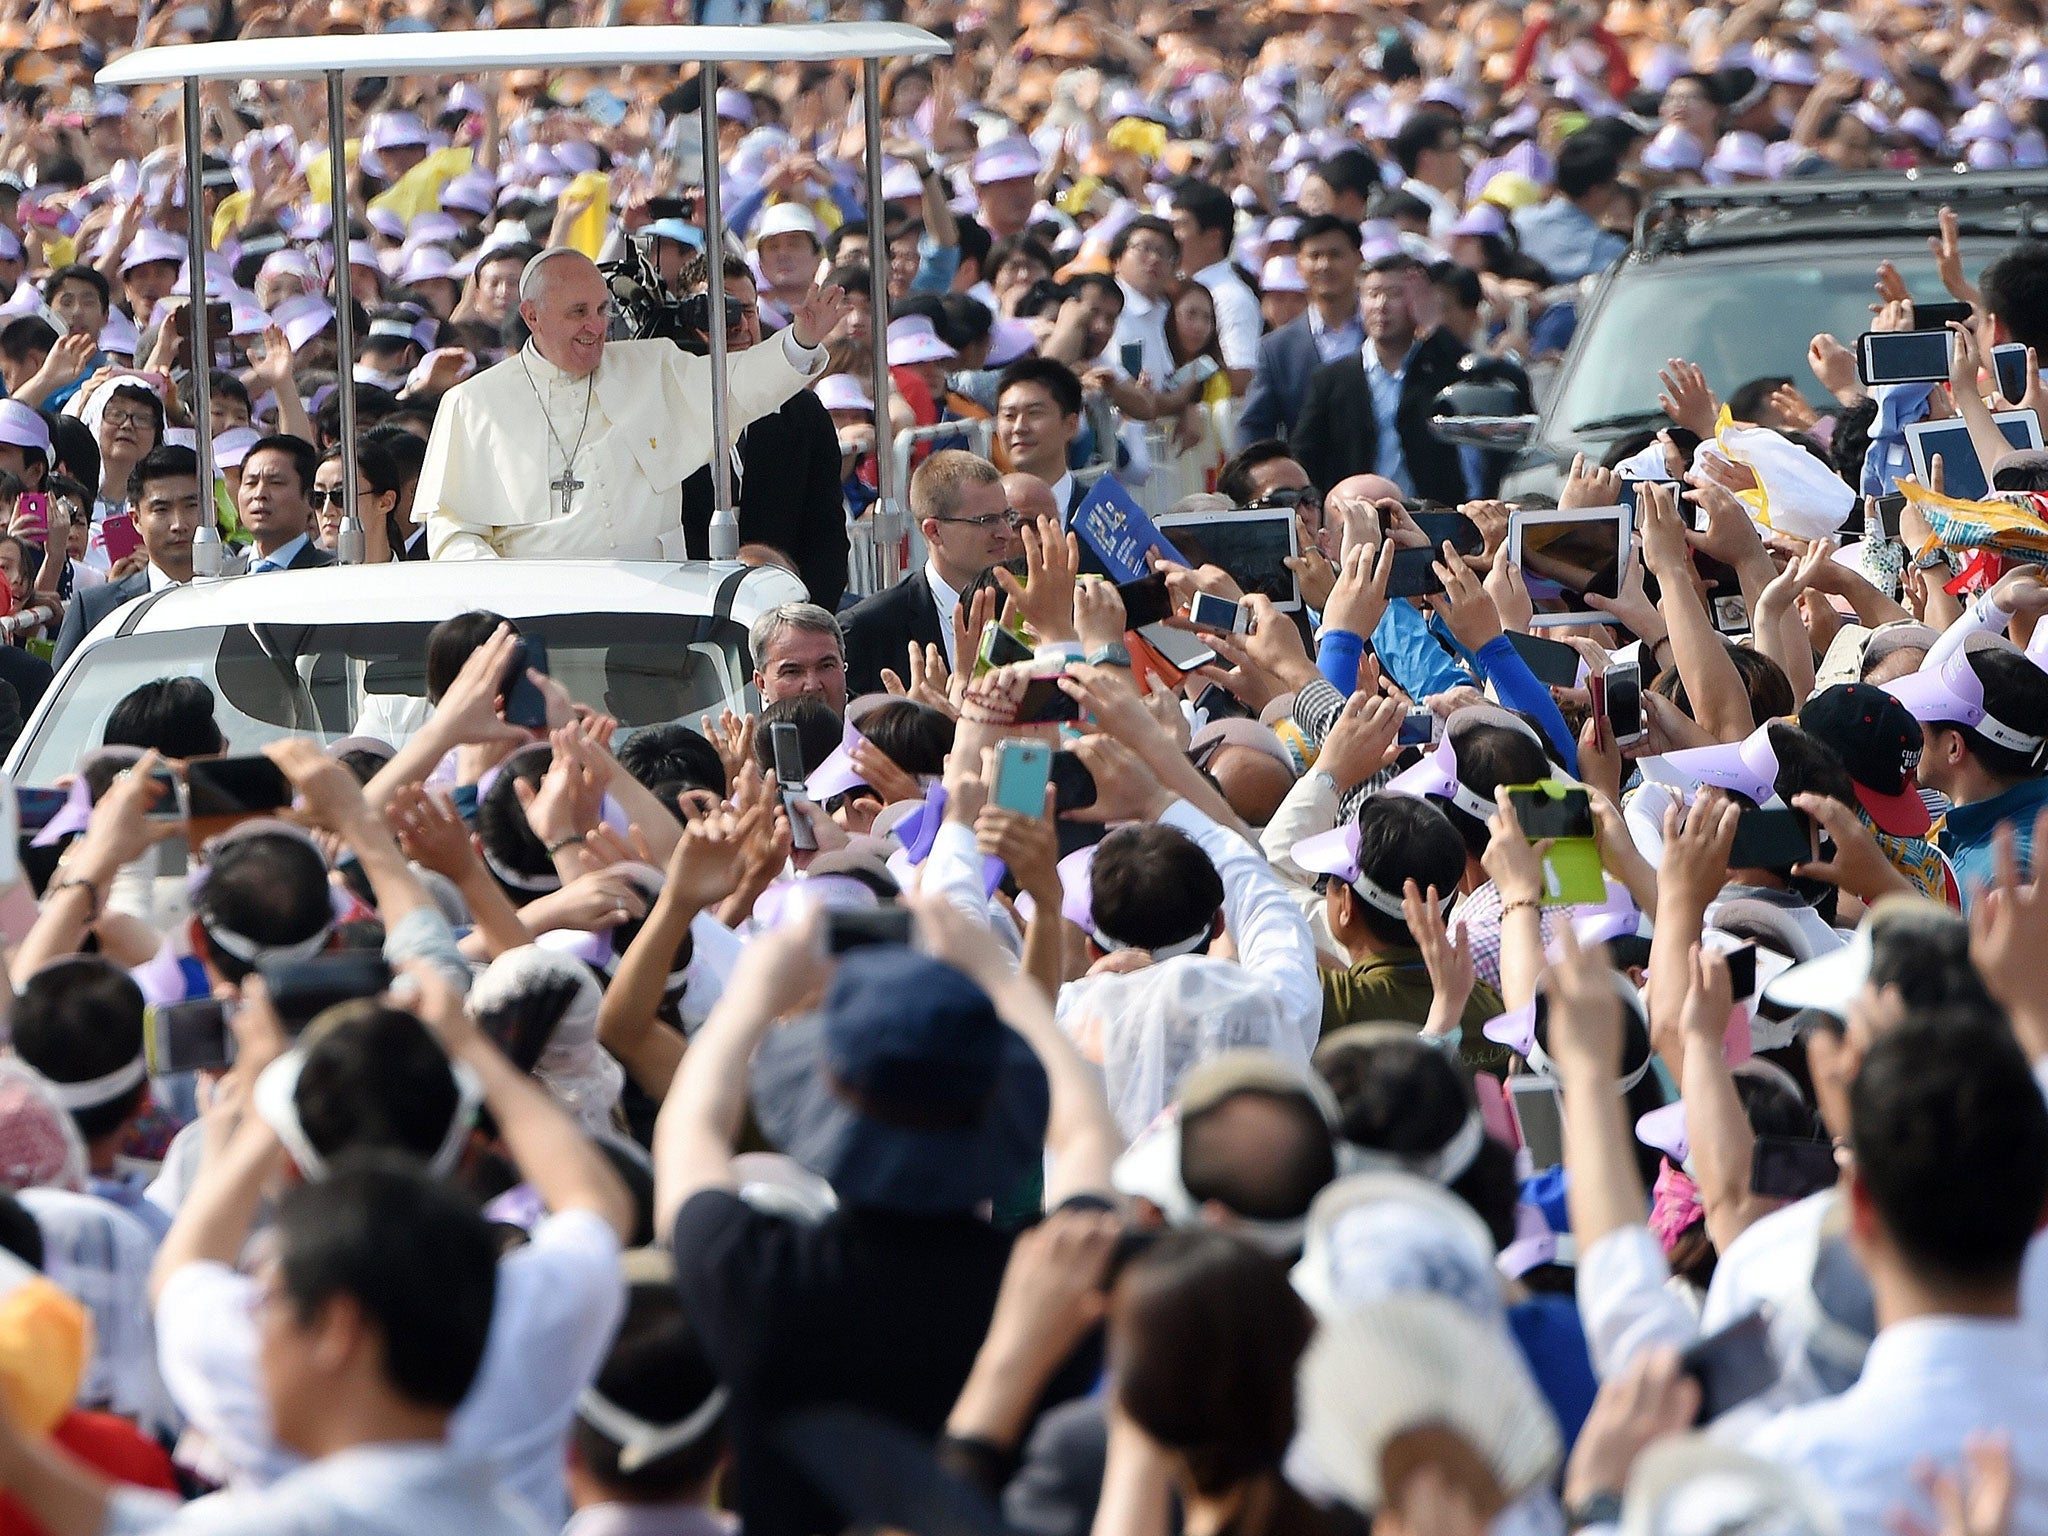 Pope Francis (L, middleground) waves to the crowd from the popemobile prior to a mass, in Seoul, South Koera, 16 August 2014.